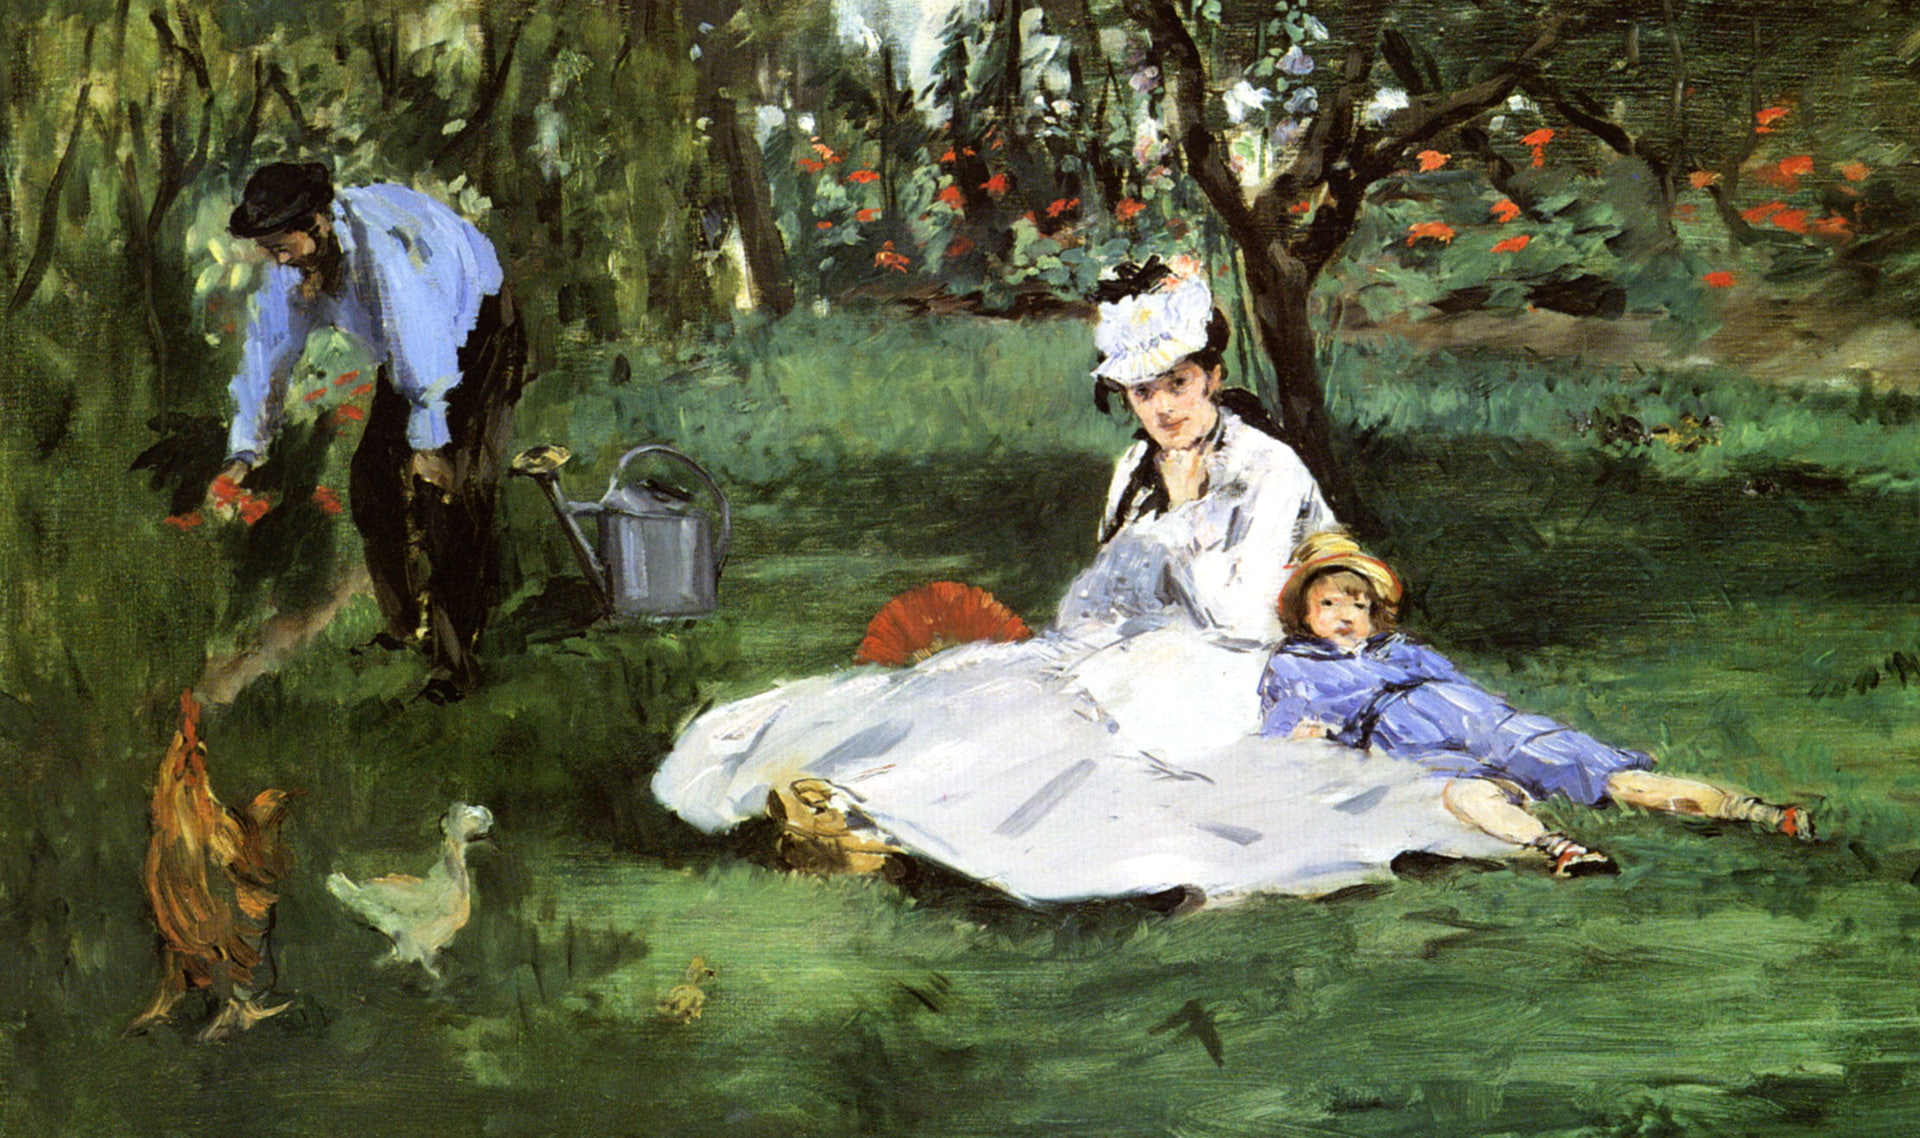 picture, genre, Edouard Manet, The Monet family in the Garden at Argenteuil